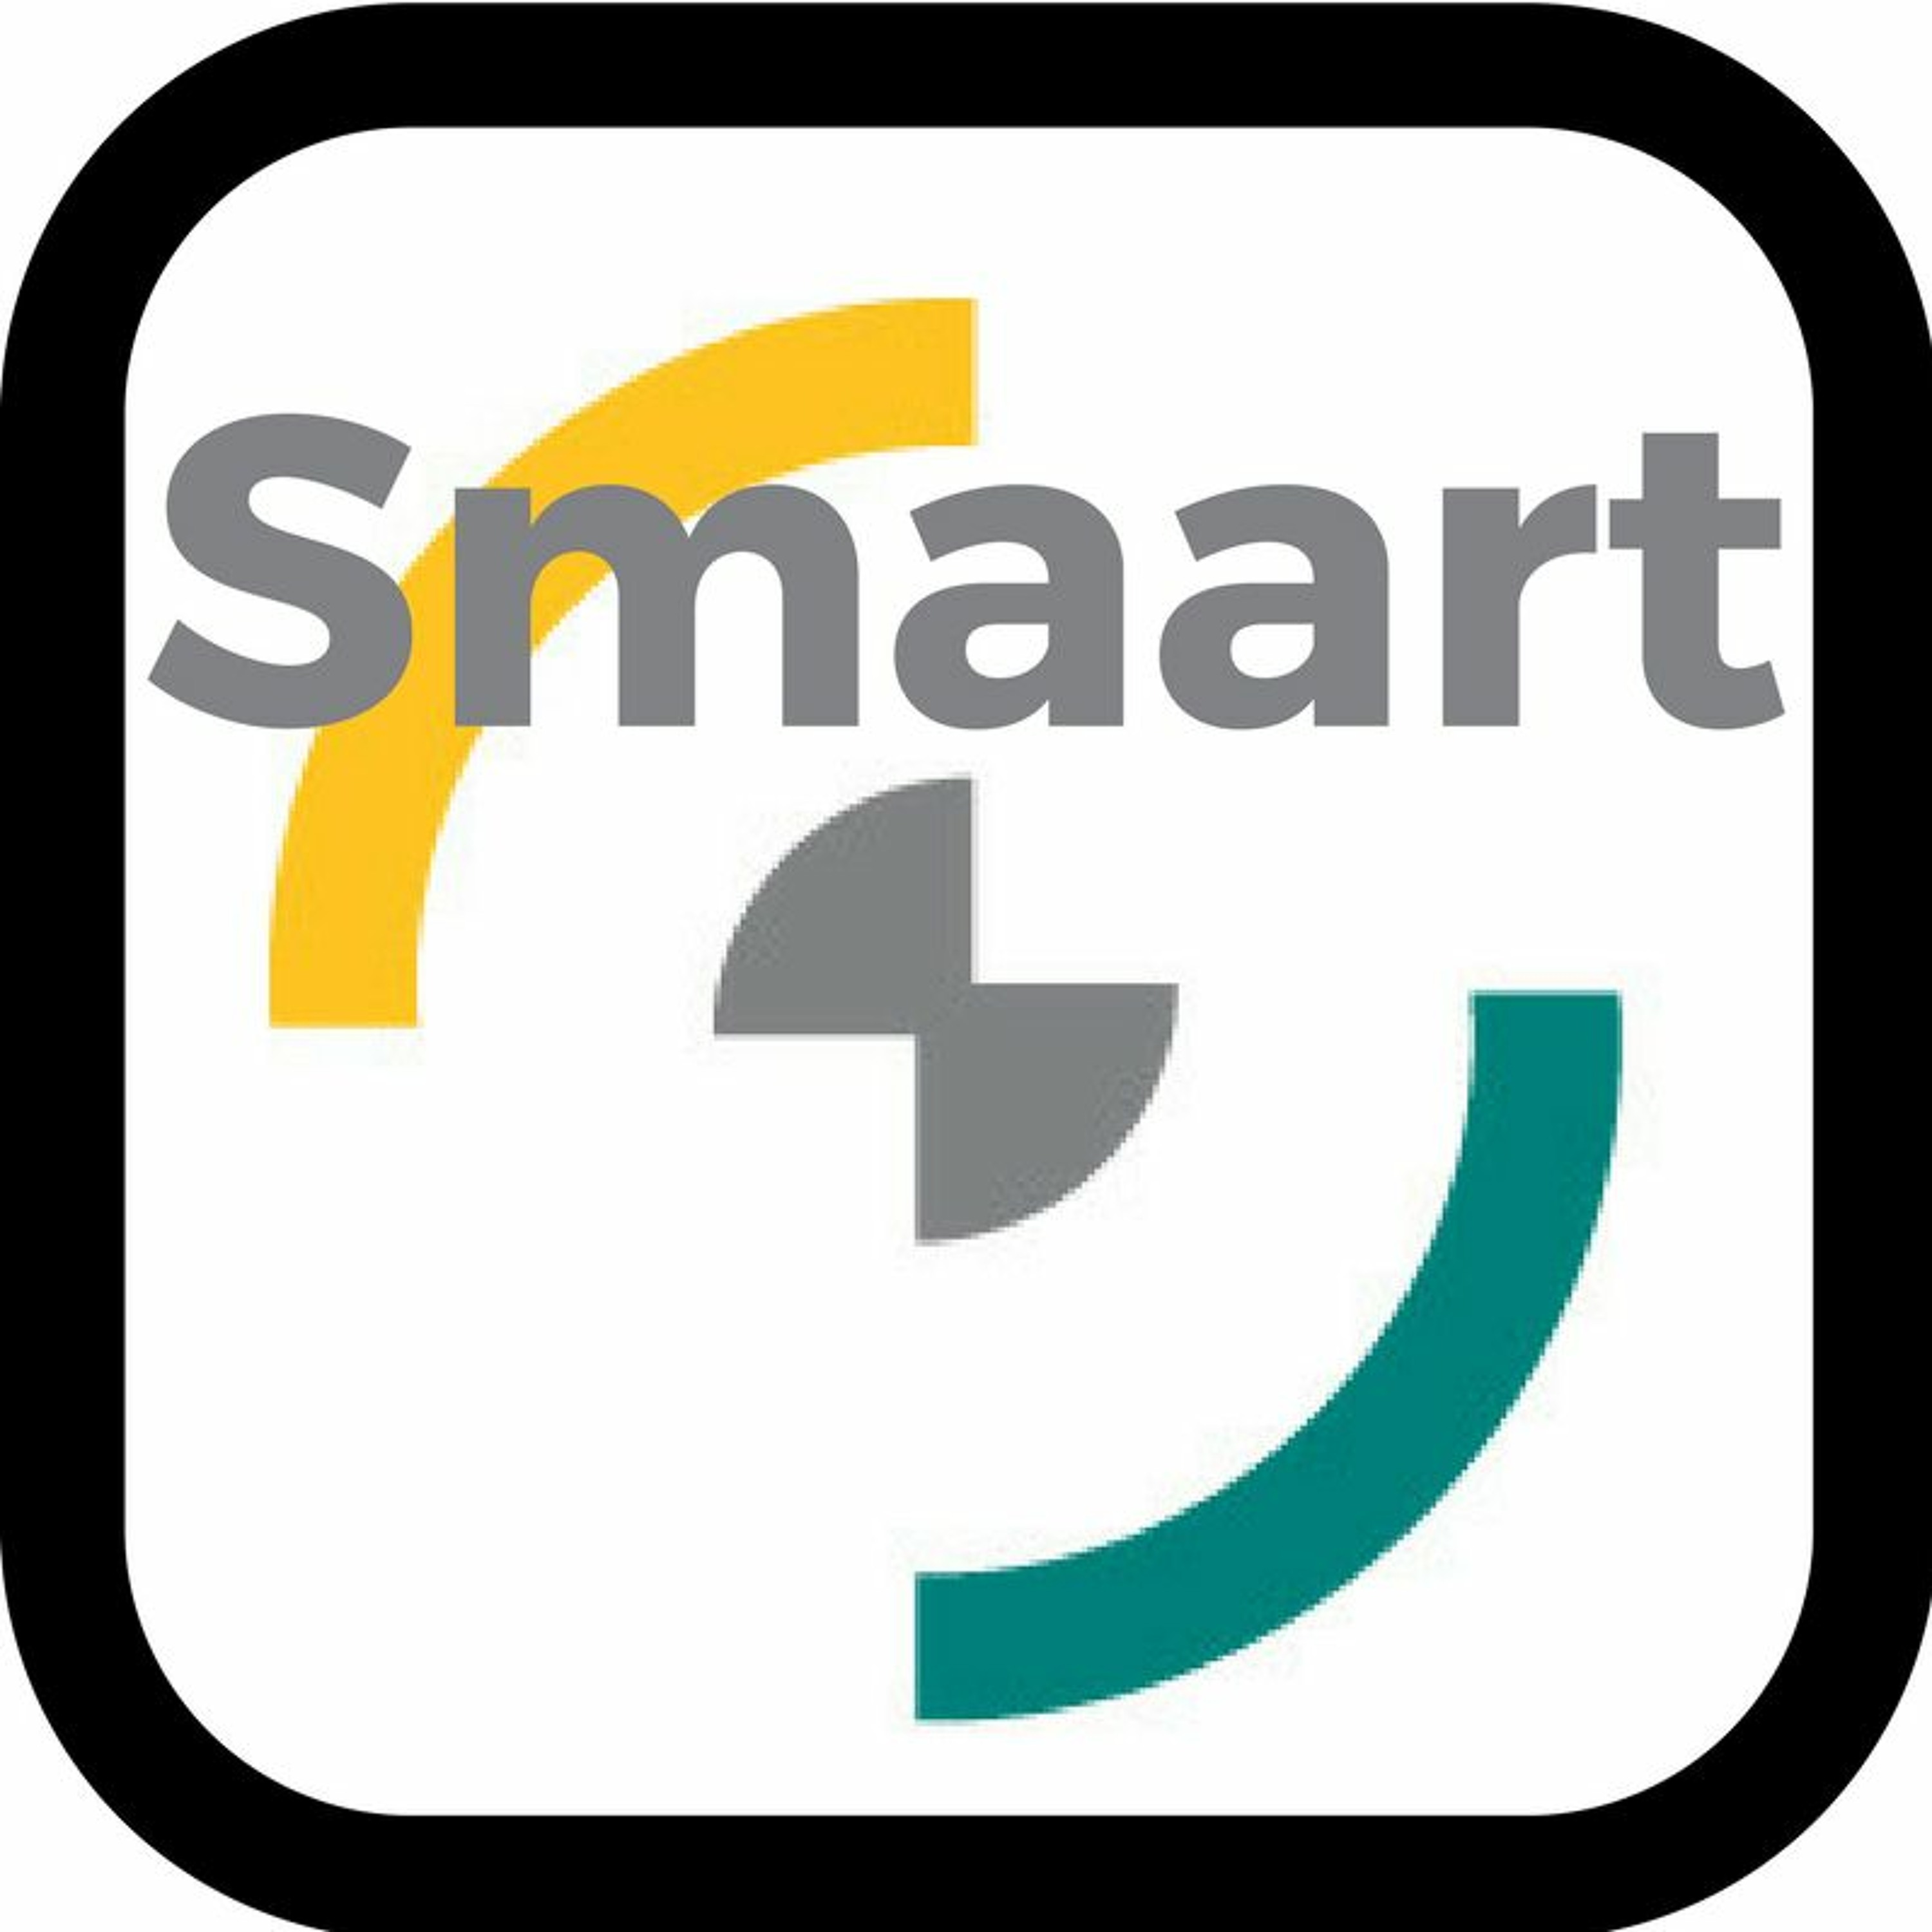 Smaart is just a tool. You are the analyzer.